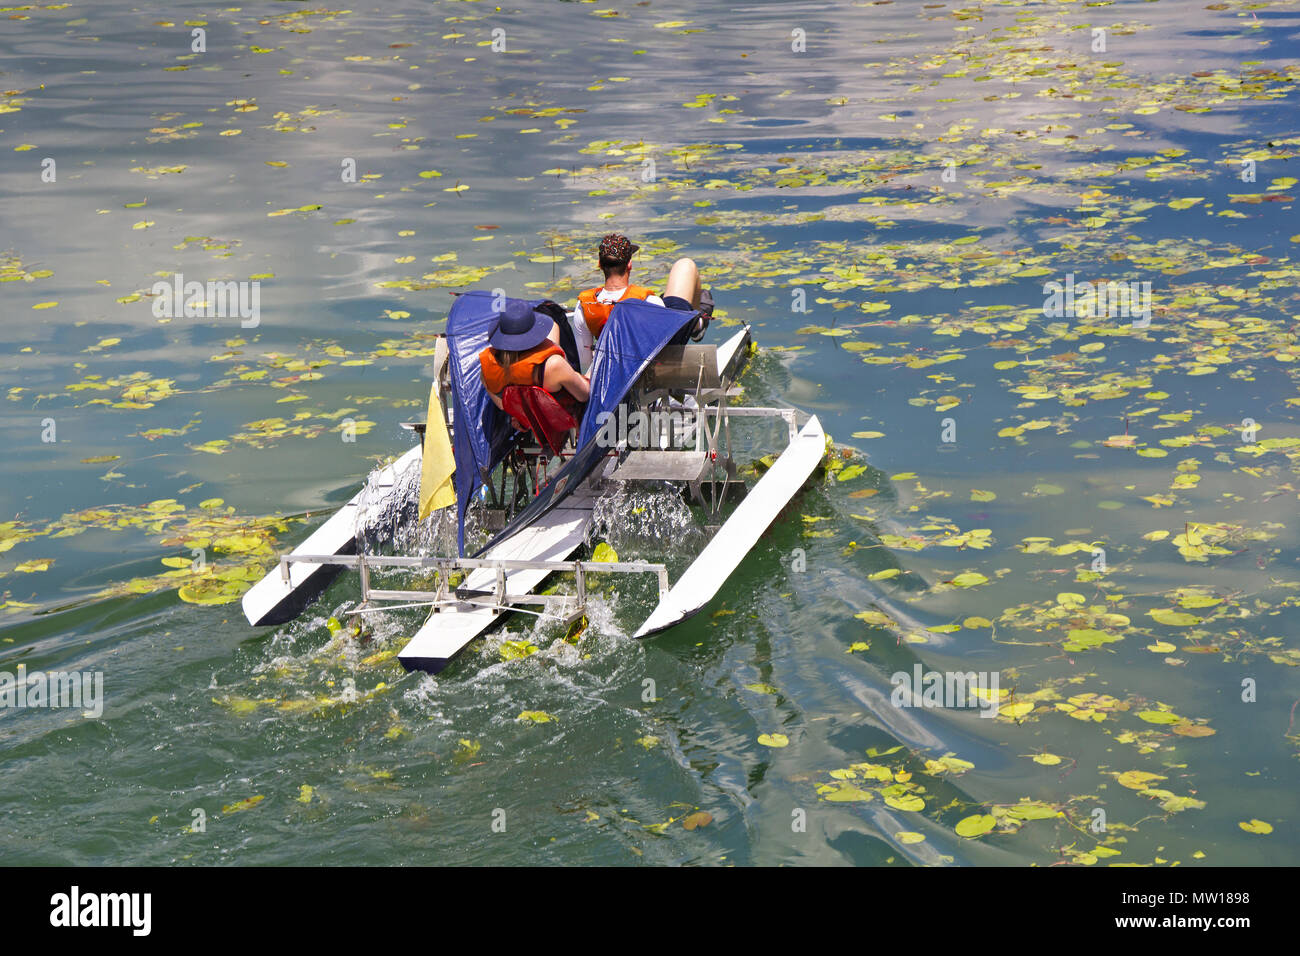 Man and woman ride with floating pedal bicycle boats across the lake Stock Photo